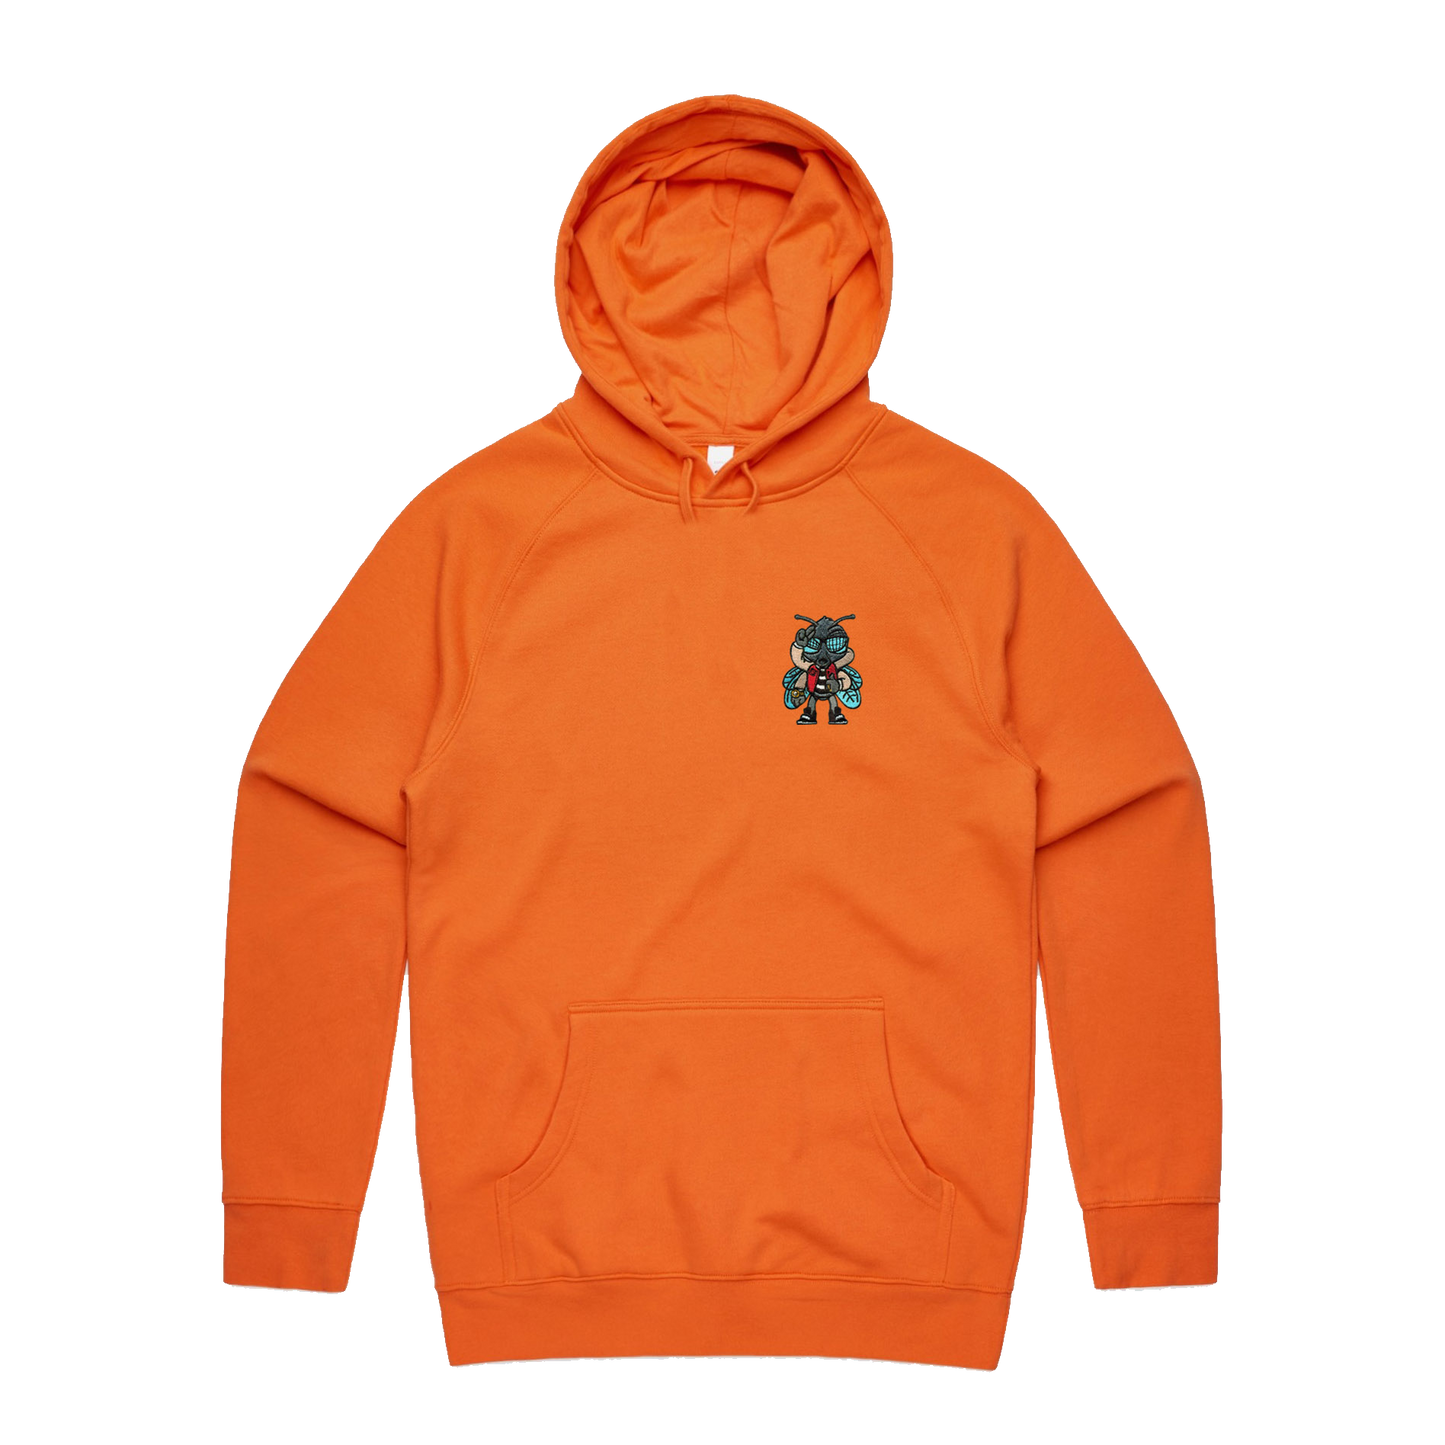 Fly Guy Patch Unisex Pullover - Orange